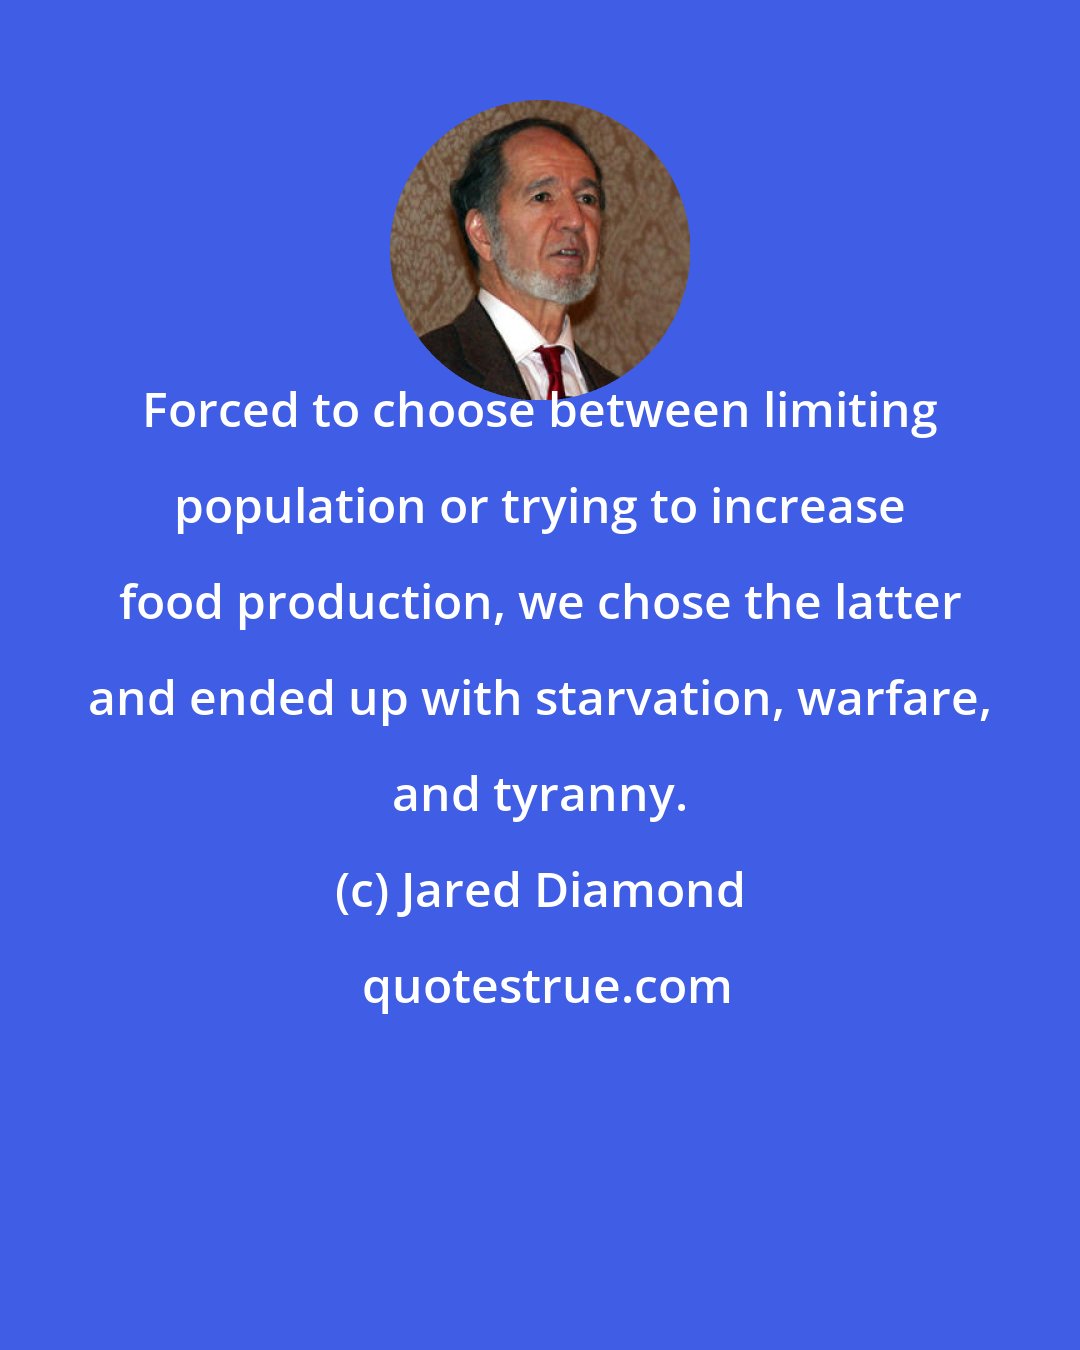 Jared Diamond: Forced to choose between limiting population or trying to increase food production, we chose the latter and ended up with starvation, warfare, and tyranny.